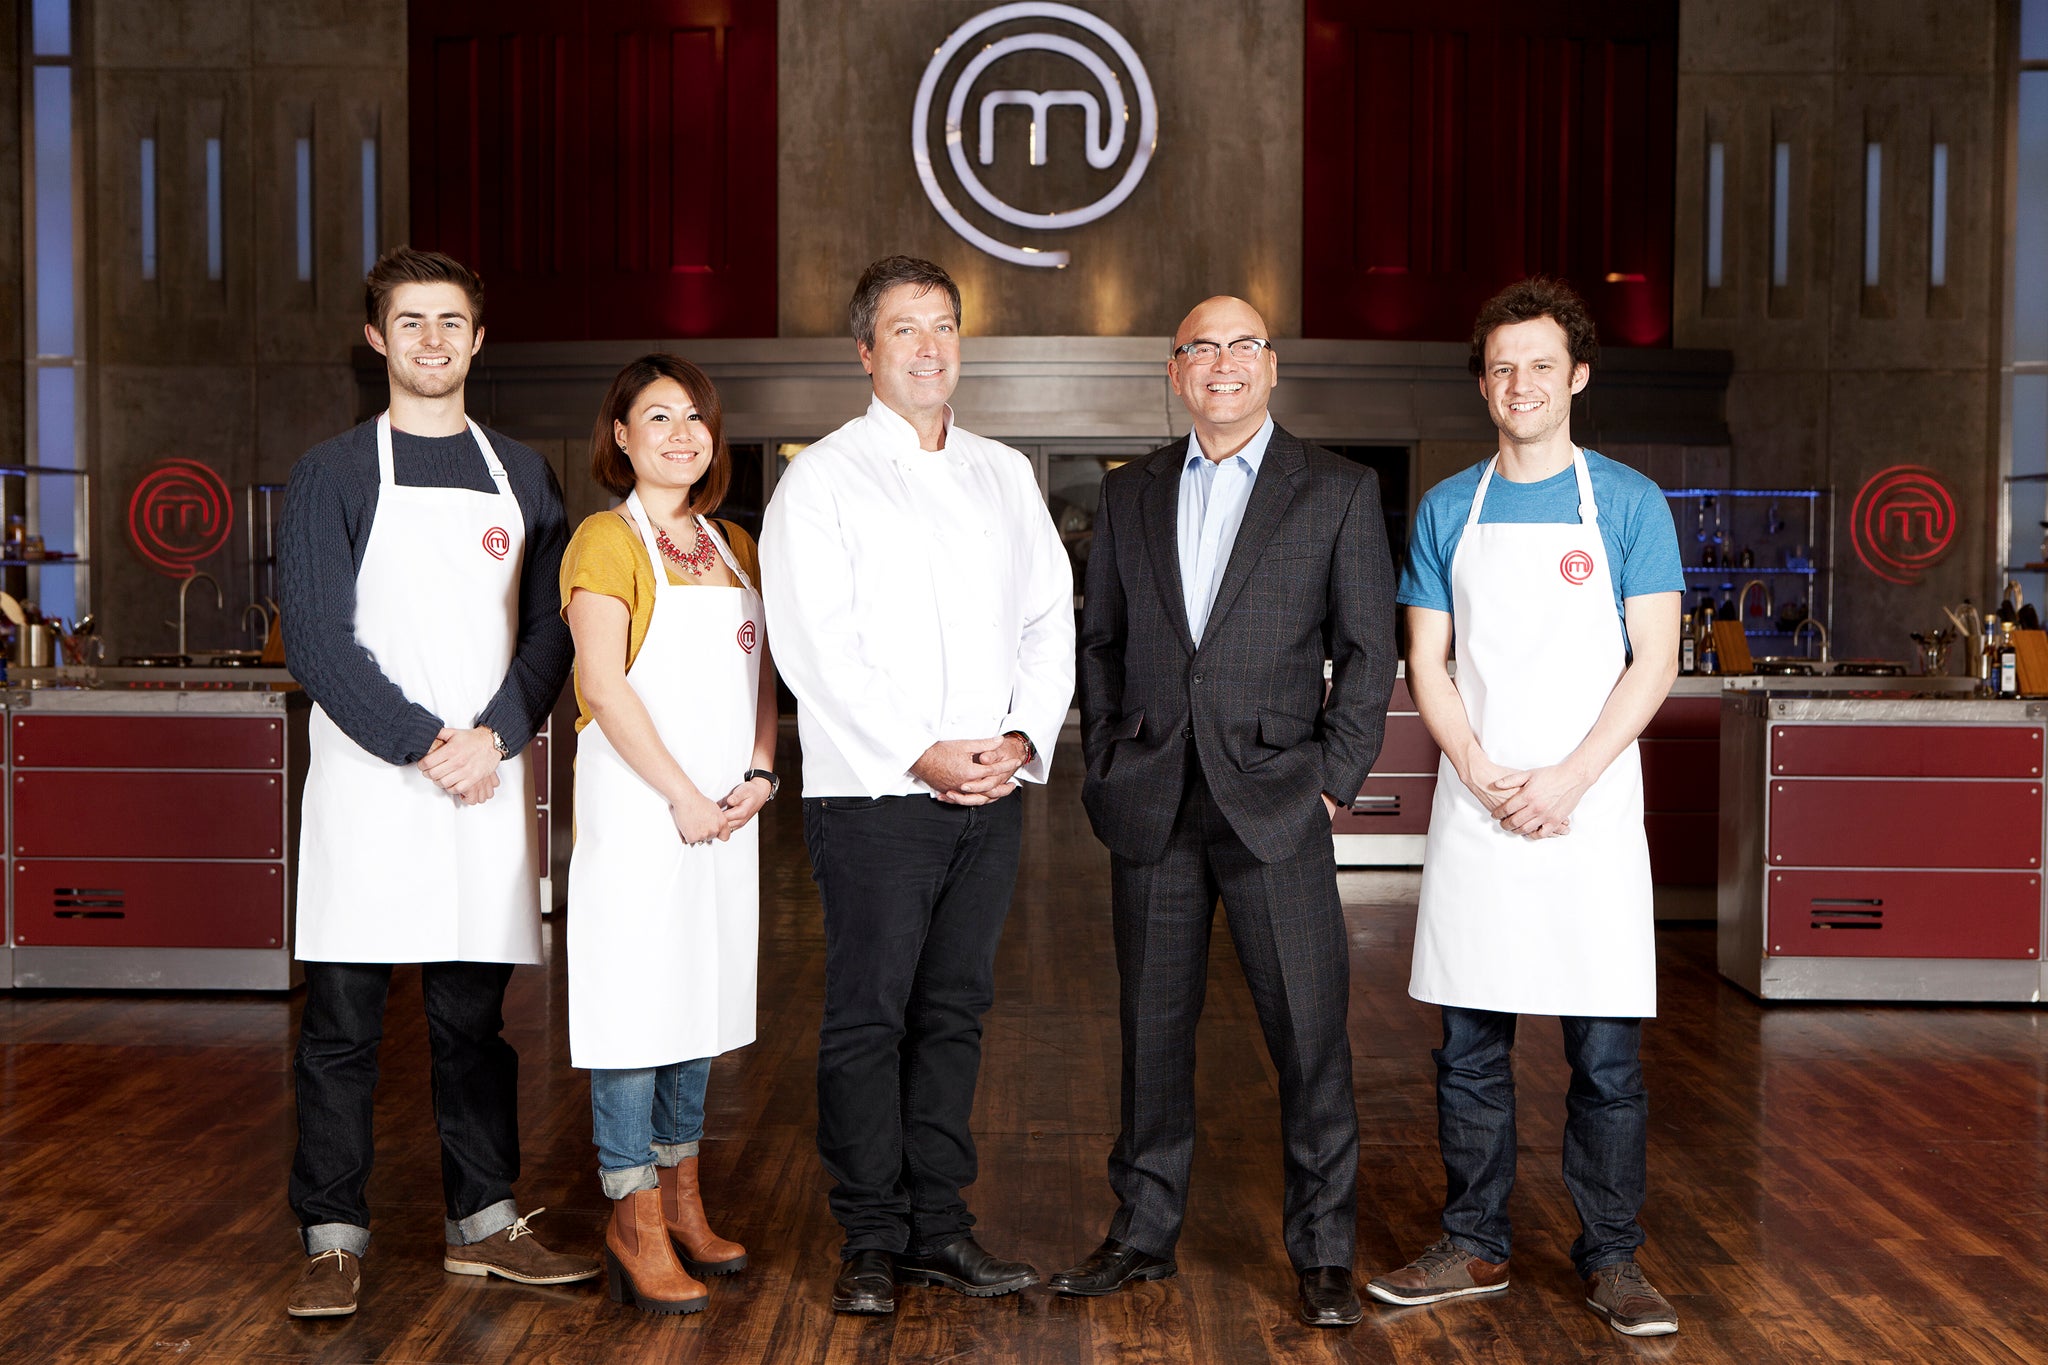 Jack, Ping and Luke pictured with MasterChef judges John and Gregg